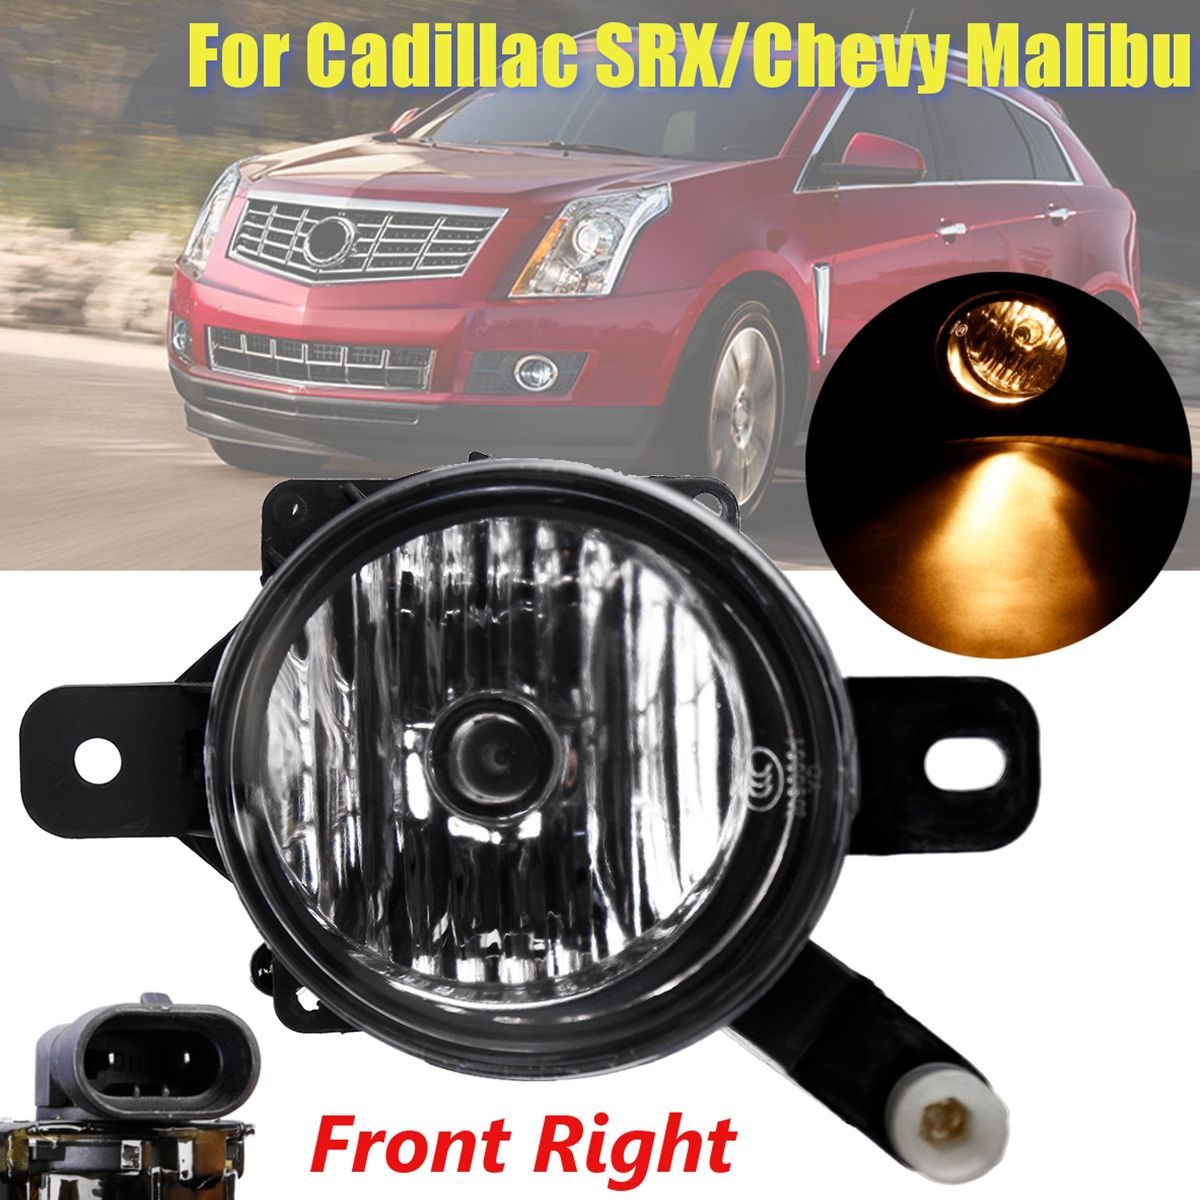 Front-Right-Car-Halogen-Fog-Driving-Lights-Lamp-for-Saturn-Astra-Cadillac-SRX-Chevy-Malibu-SS-1382547